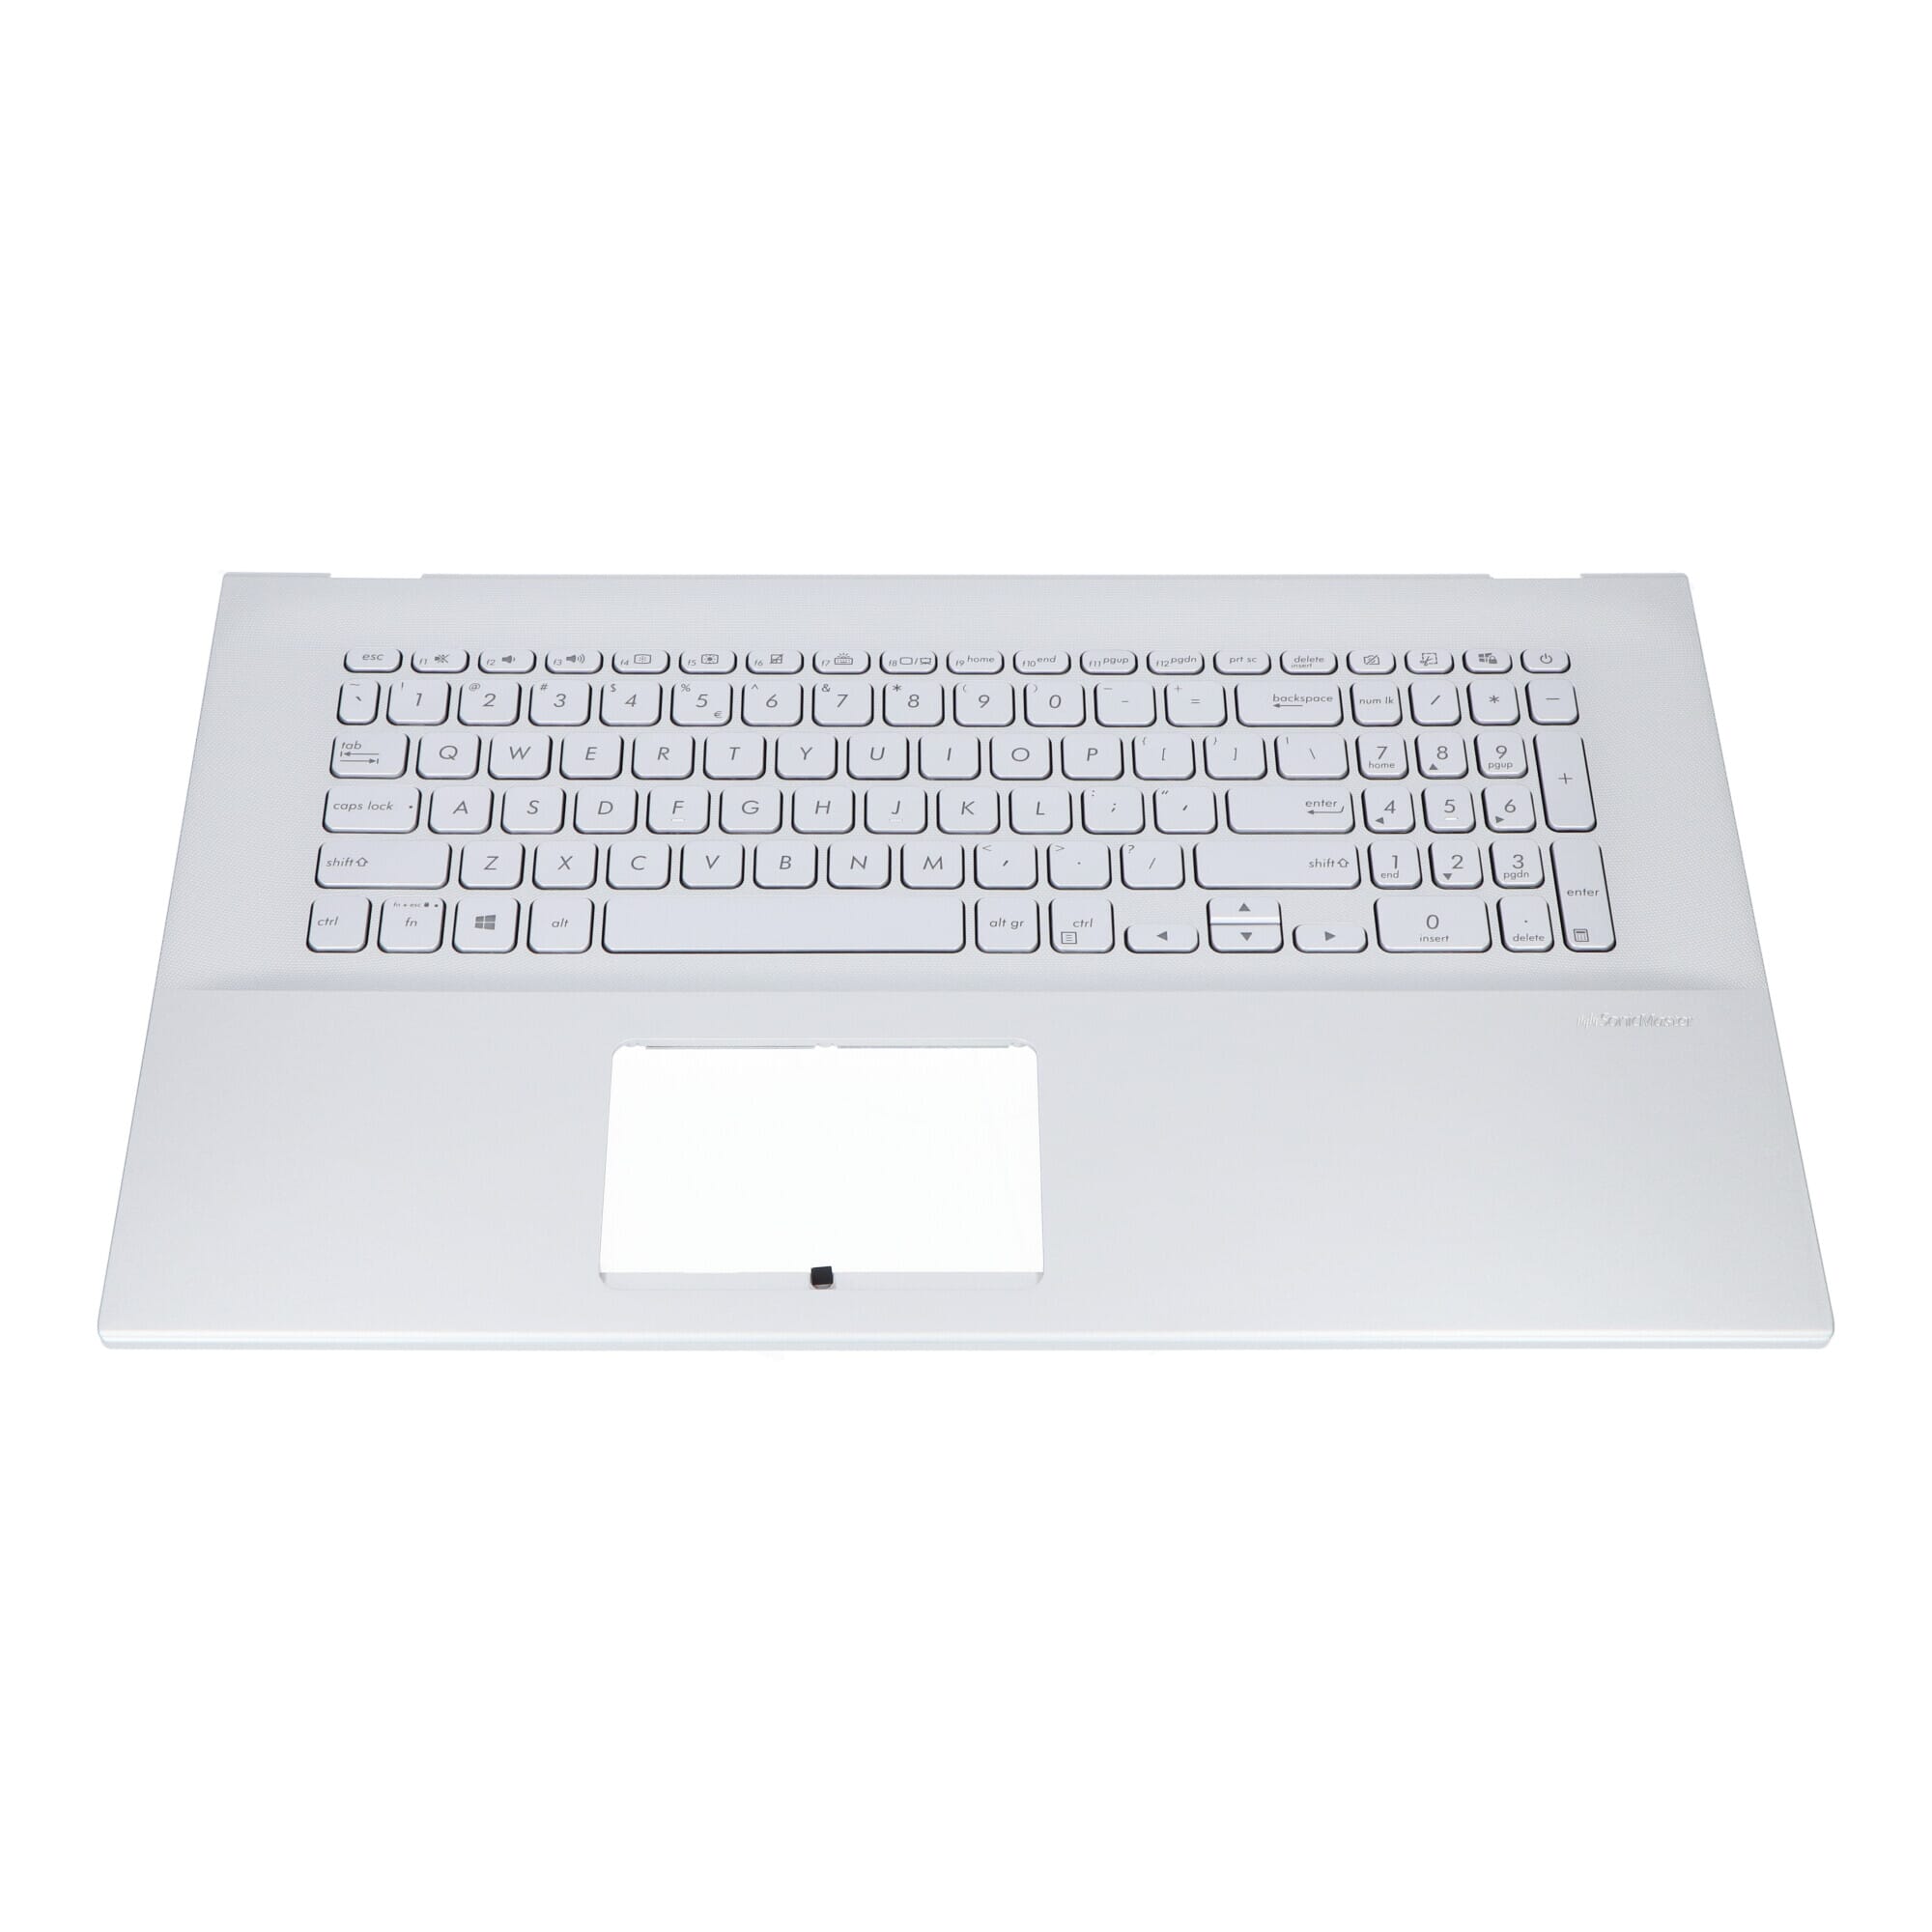 tarief Politieagent balans Asus Laptop Toetsenbord Qwerty US + Top Cover, Backlit (90NB0L61-R31UI0) -  ReplaceDirect.be